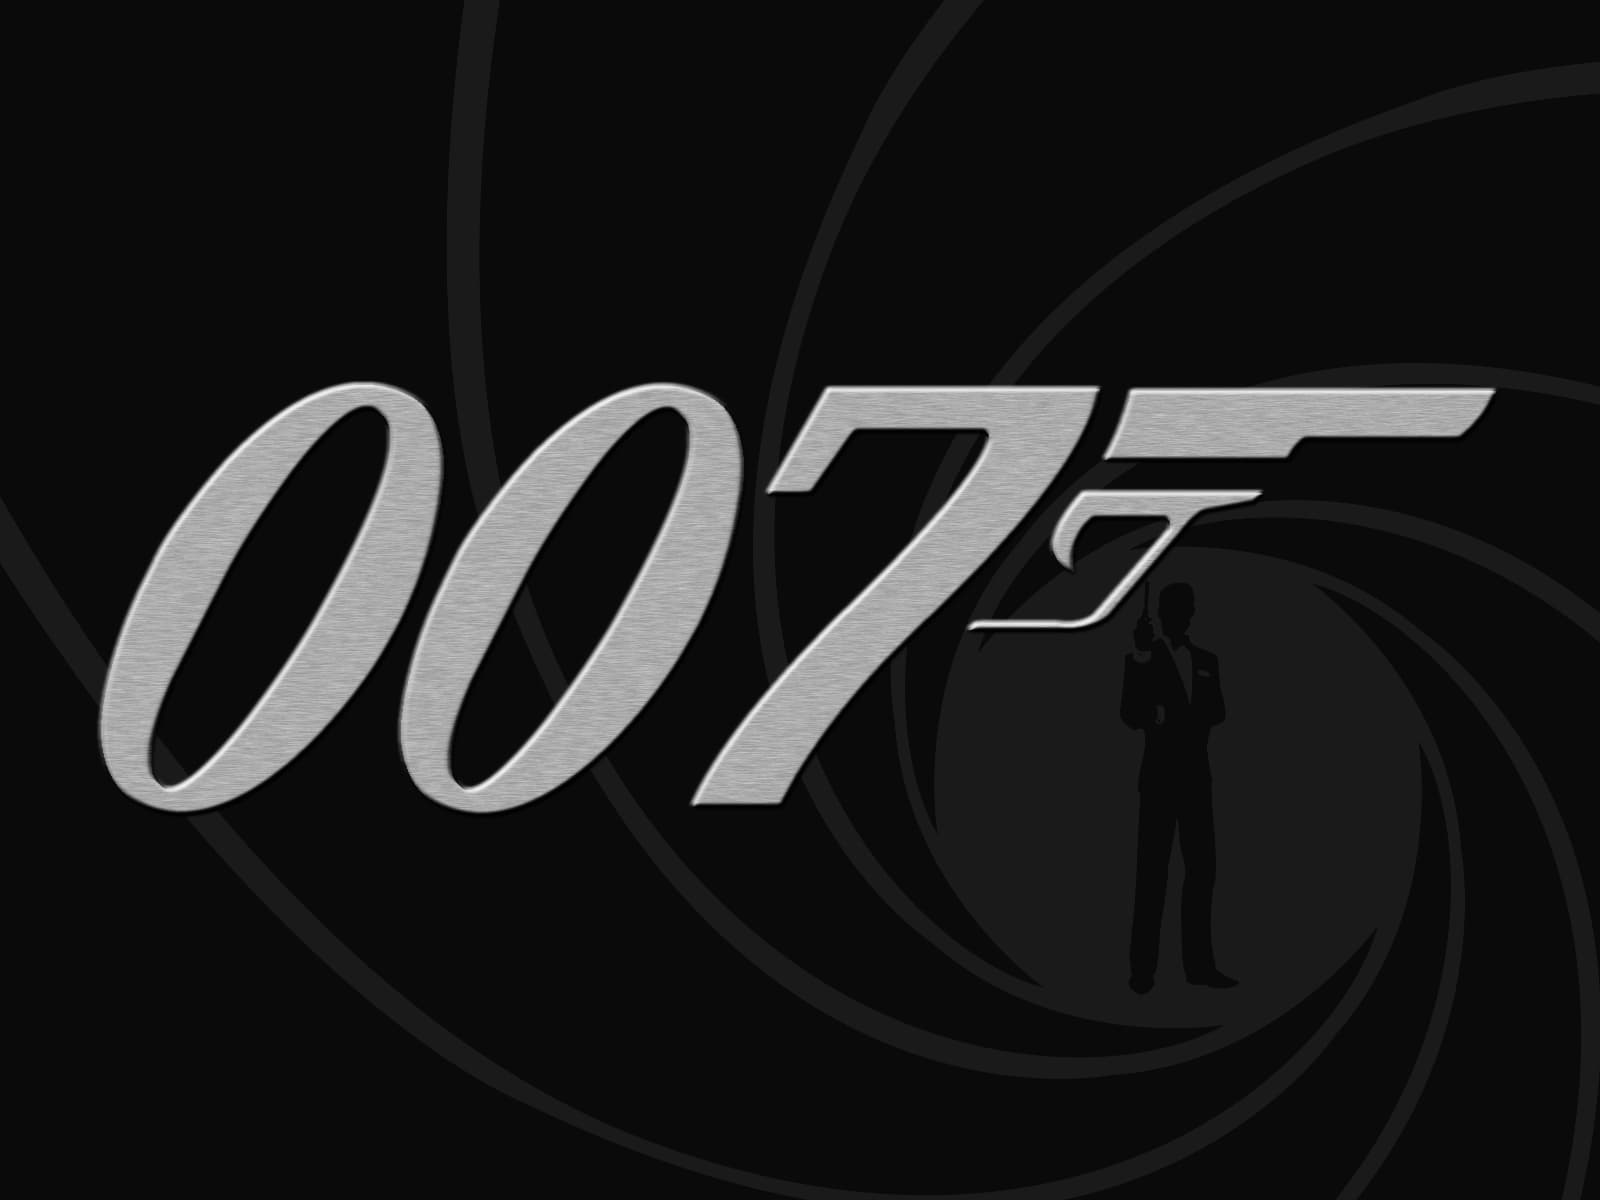 what to do if your phone is tapped or being monitored: Dial the James Bond code